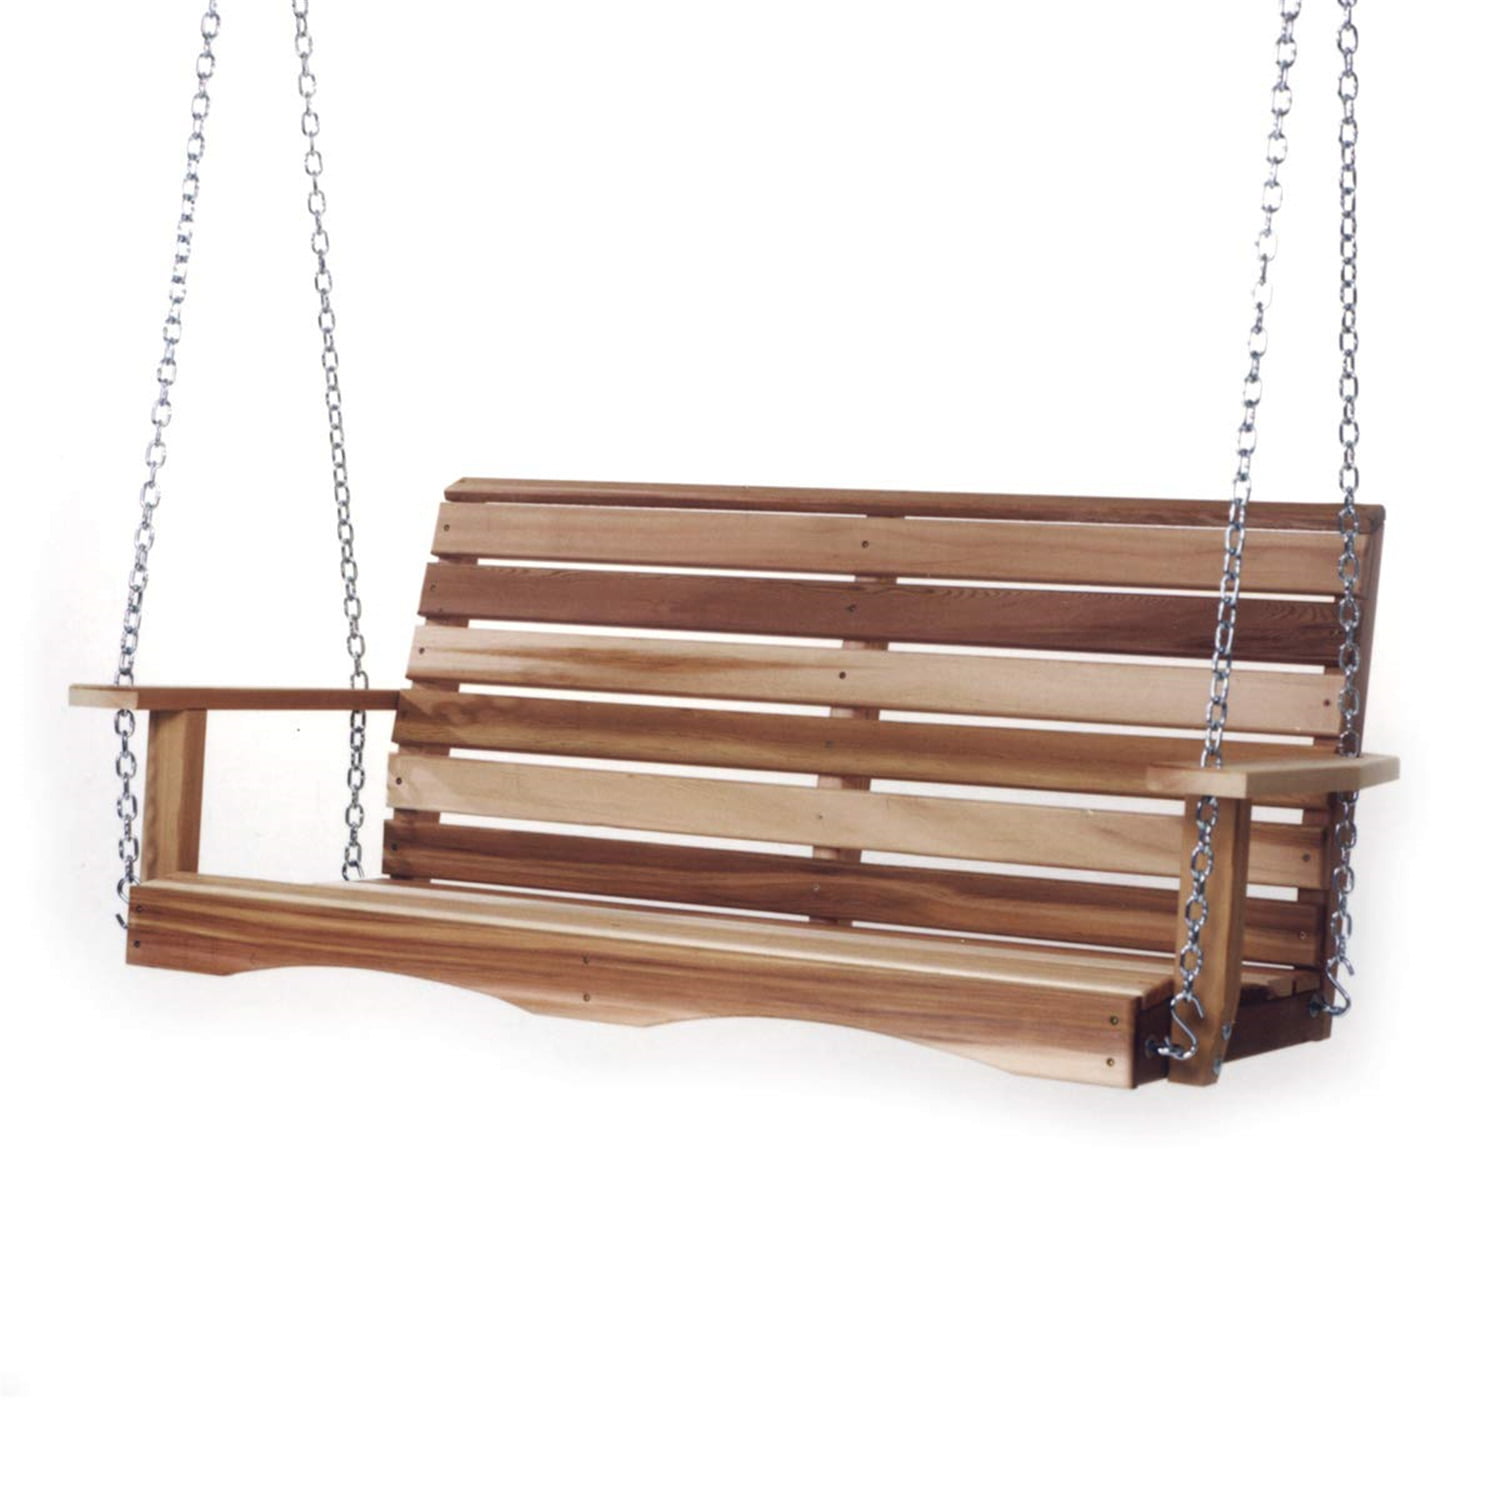 Free Shipping Brand New 4 Foot Cedar Wood Country Style Porch Swing with Hanging Chain